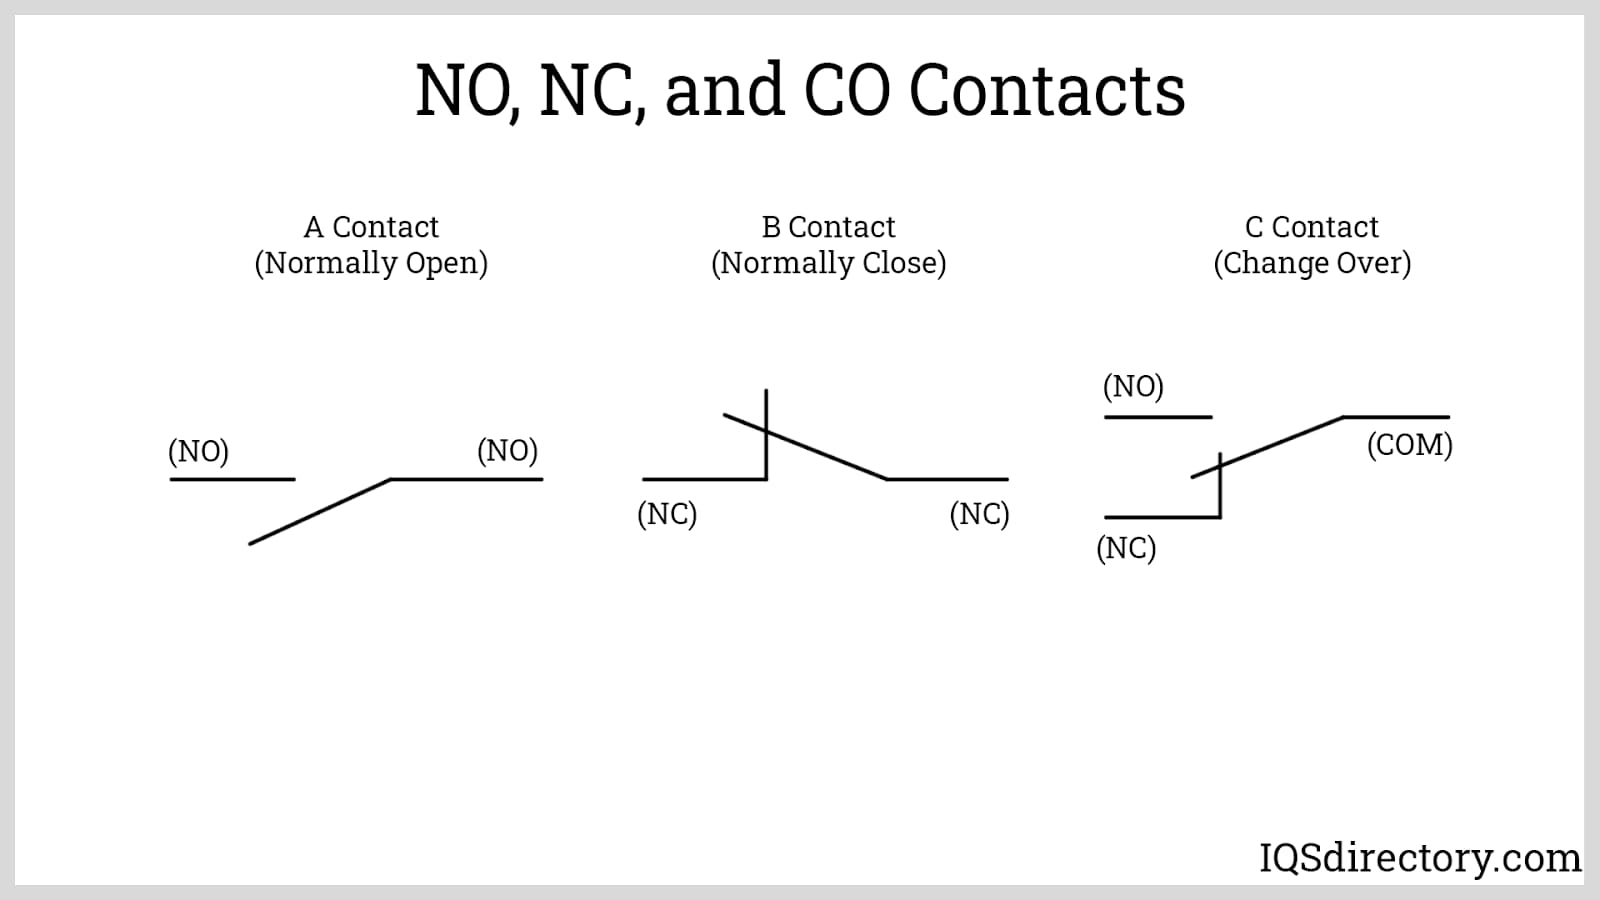 NO, NC, and CO Contacts